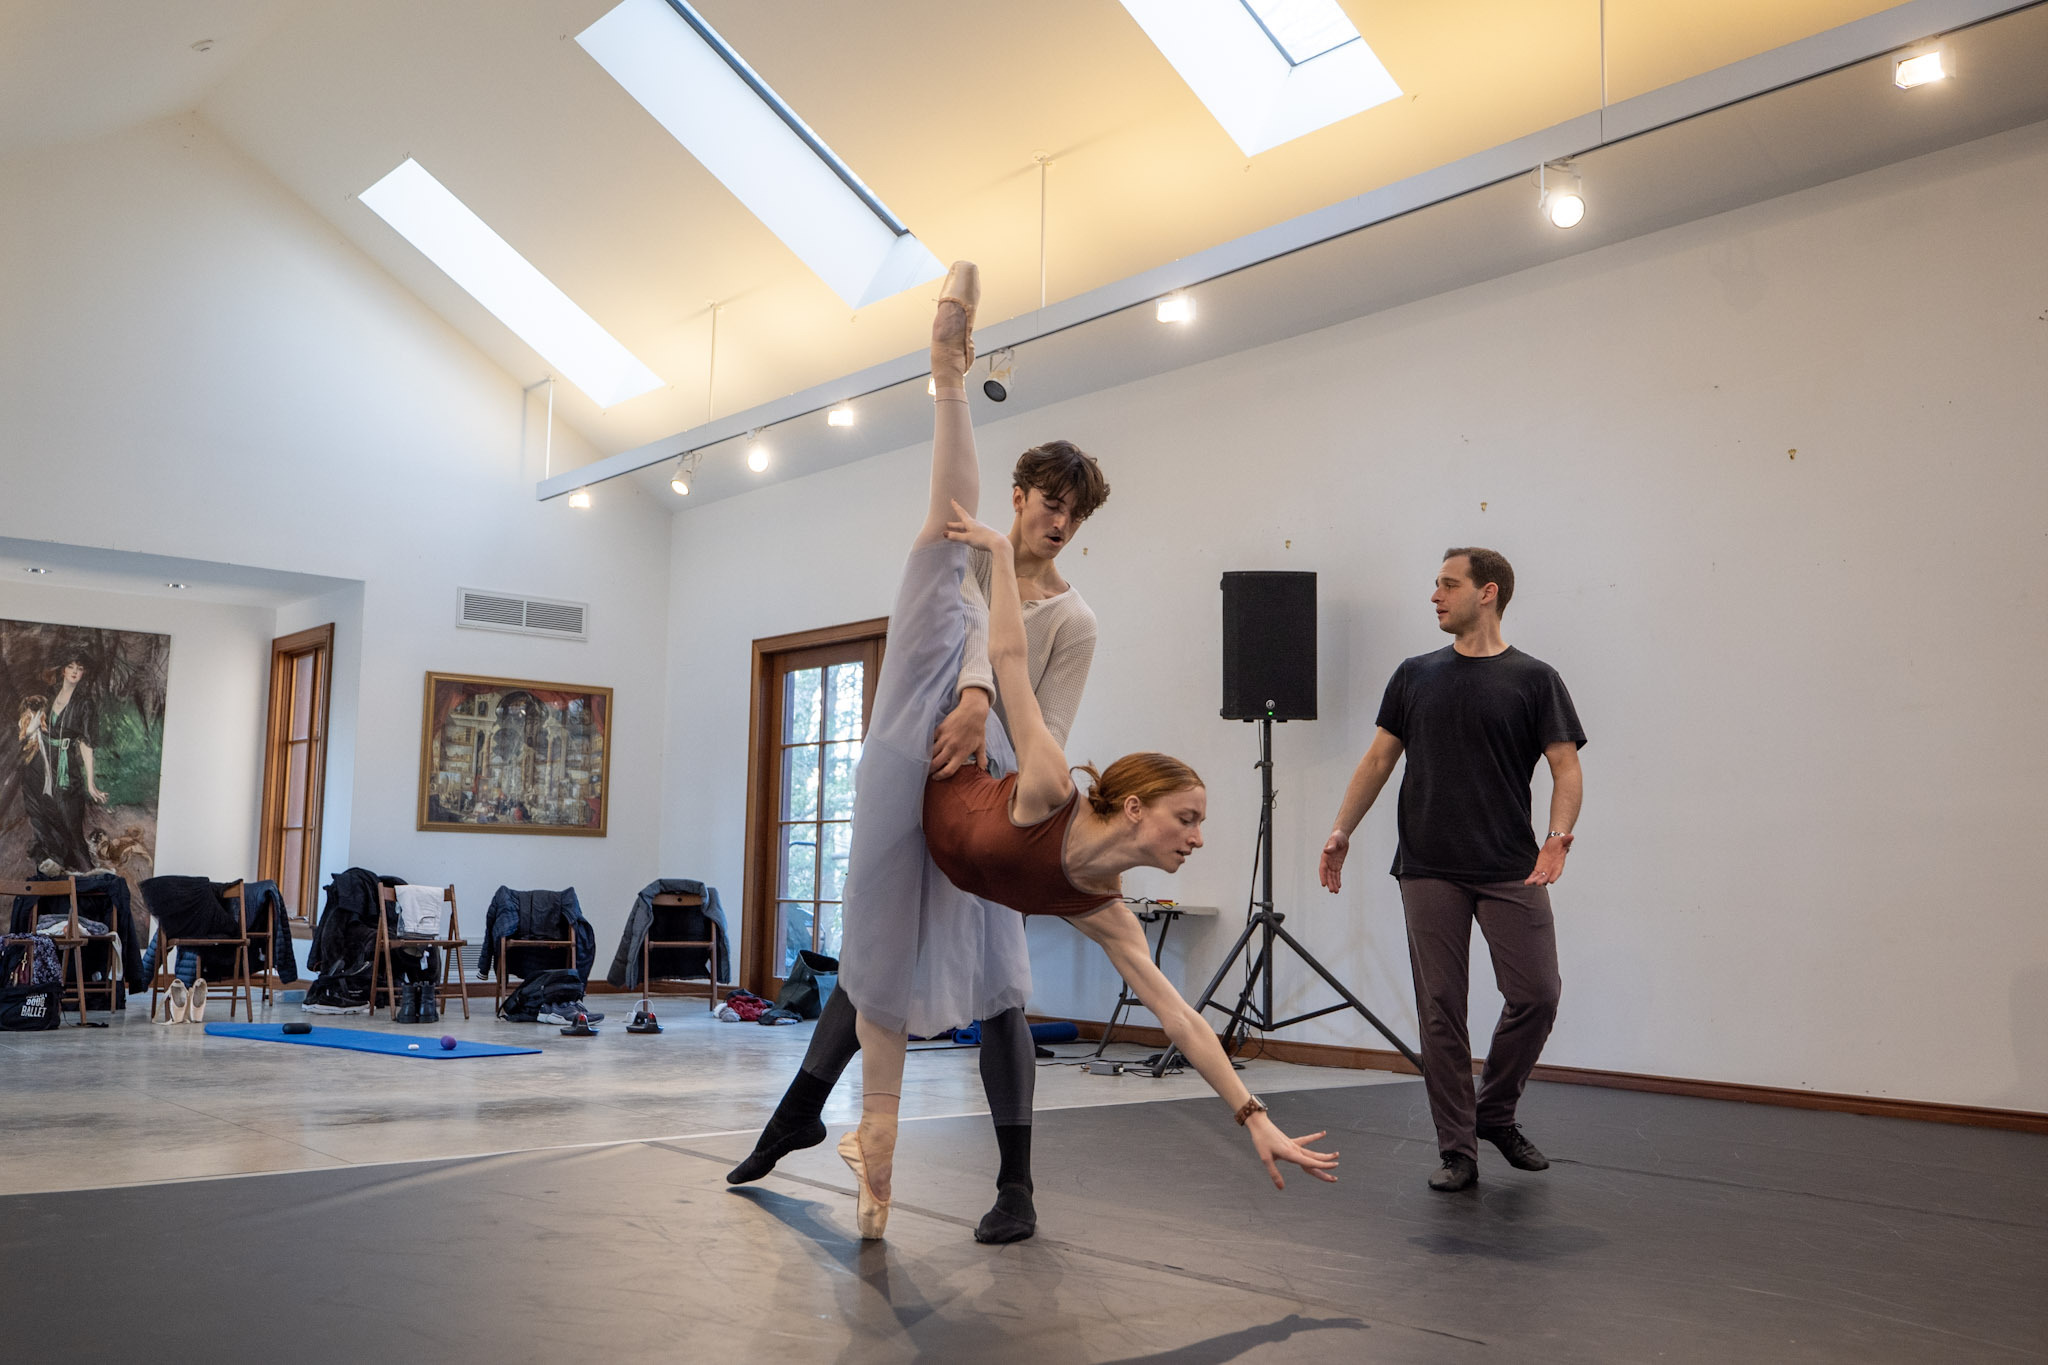 Catherine Hurlin, Michael de la Nunez and Craig Salstein from Hamptons Dance Project in rehearsal at the Guild Hall William P. Rayner Artist-in-Residence studio. © JOE BRONDO FOR GUILD HALL